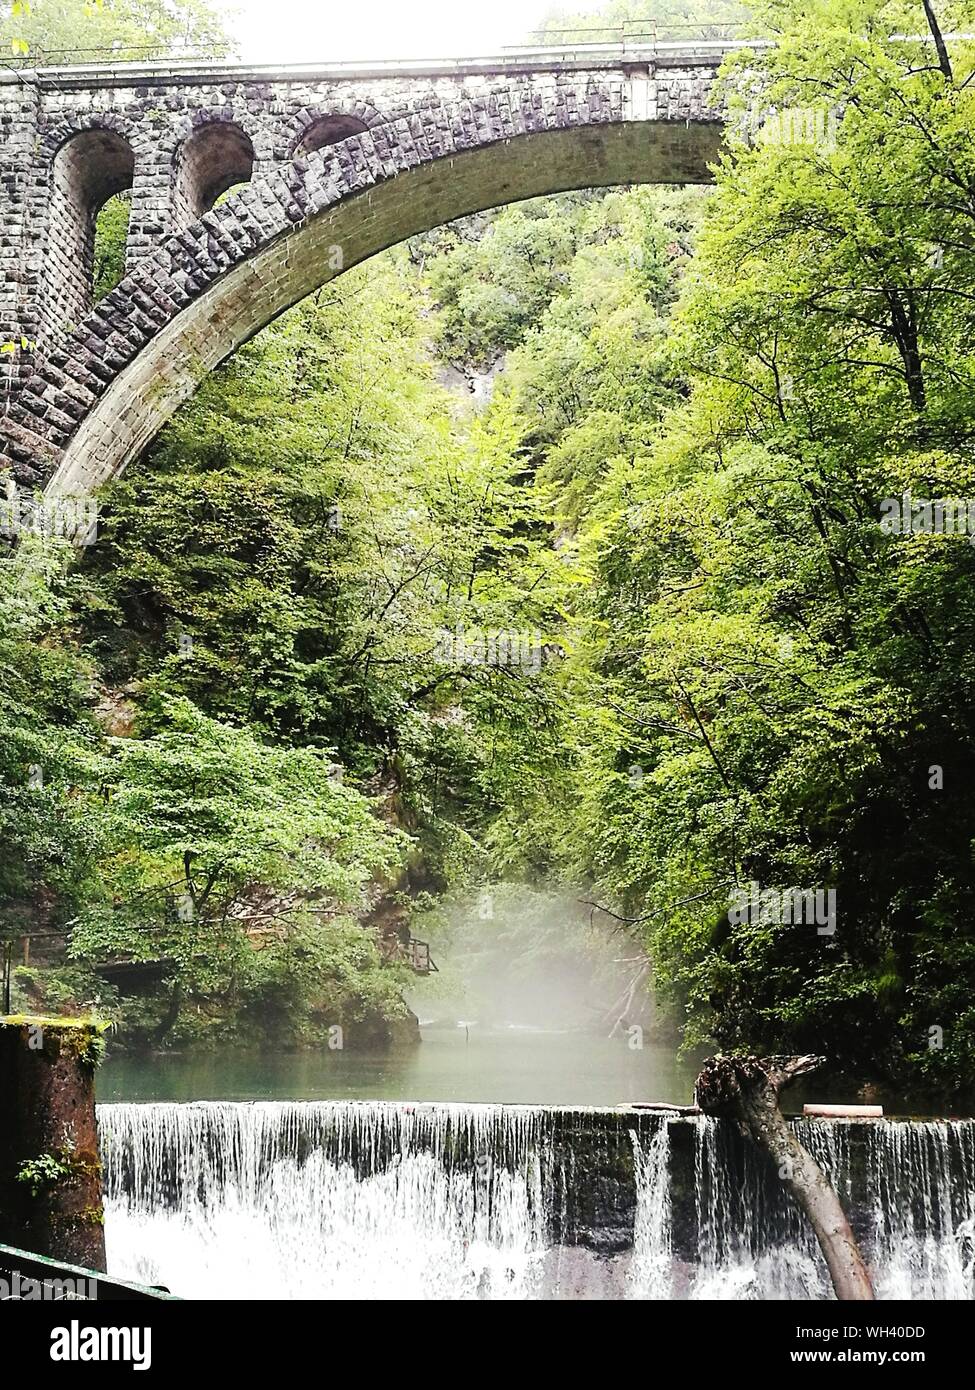 Water Flowing Amidst Trees Under Arch Bridge Stock Photo